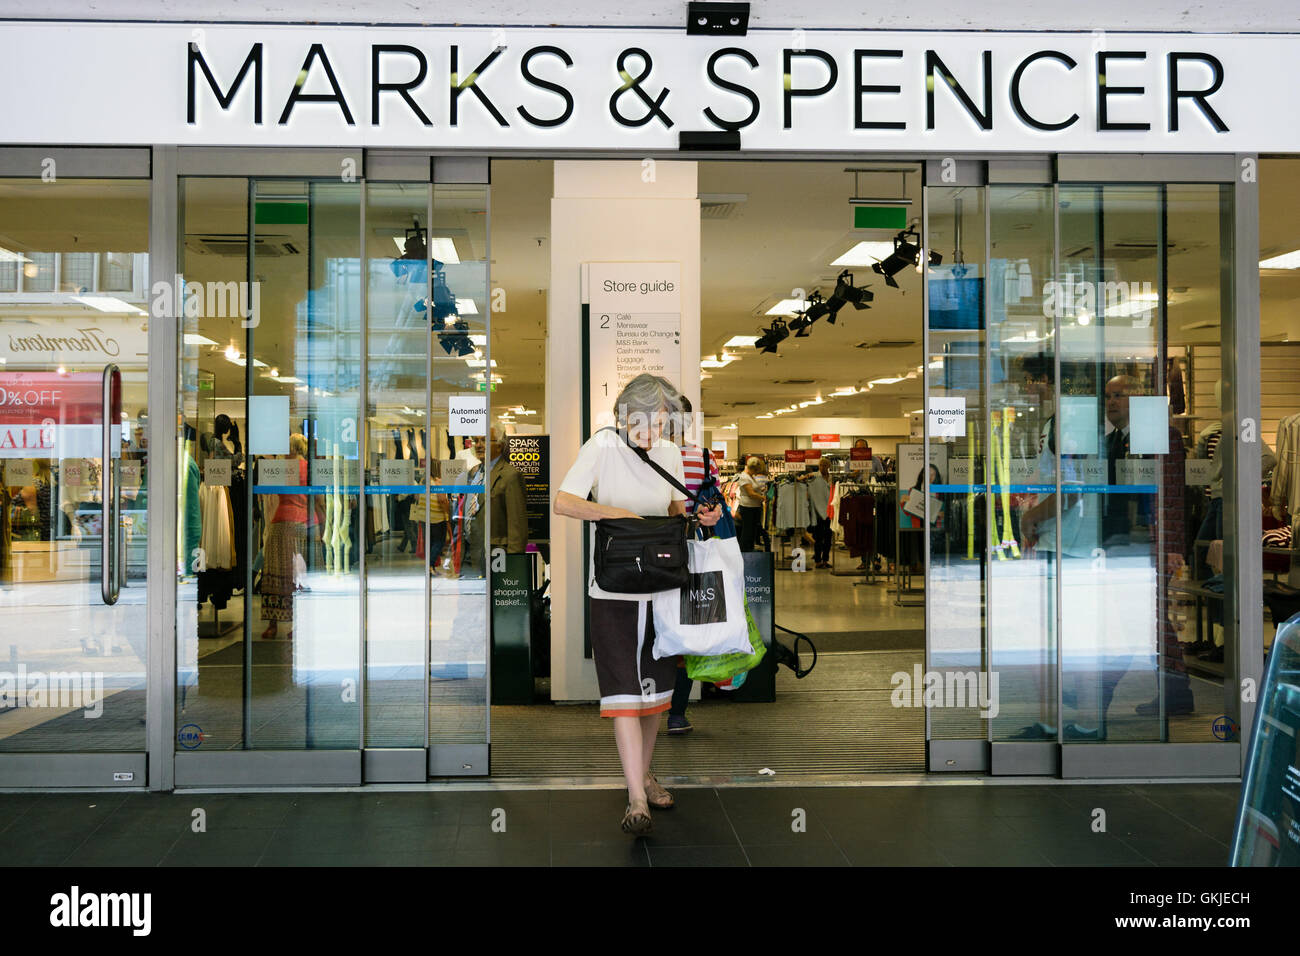 Exeter, United Kingdom - August 18, 2016: Customer exits Marks & Spencer store in Exeter. Stock Photo